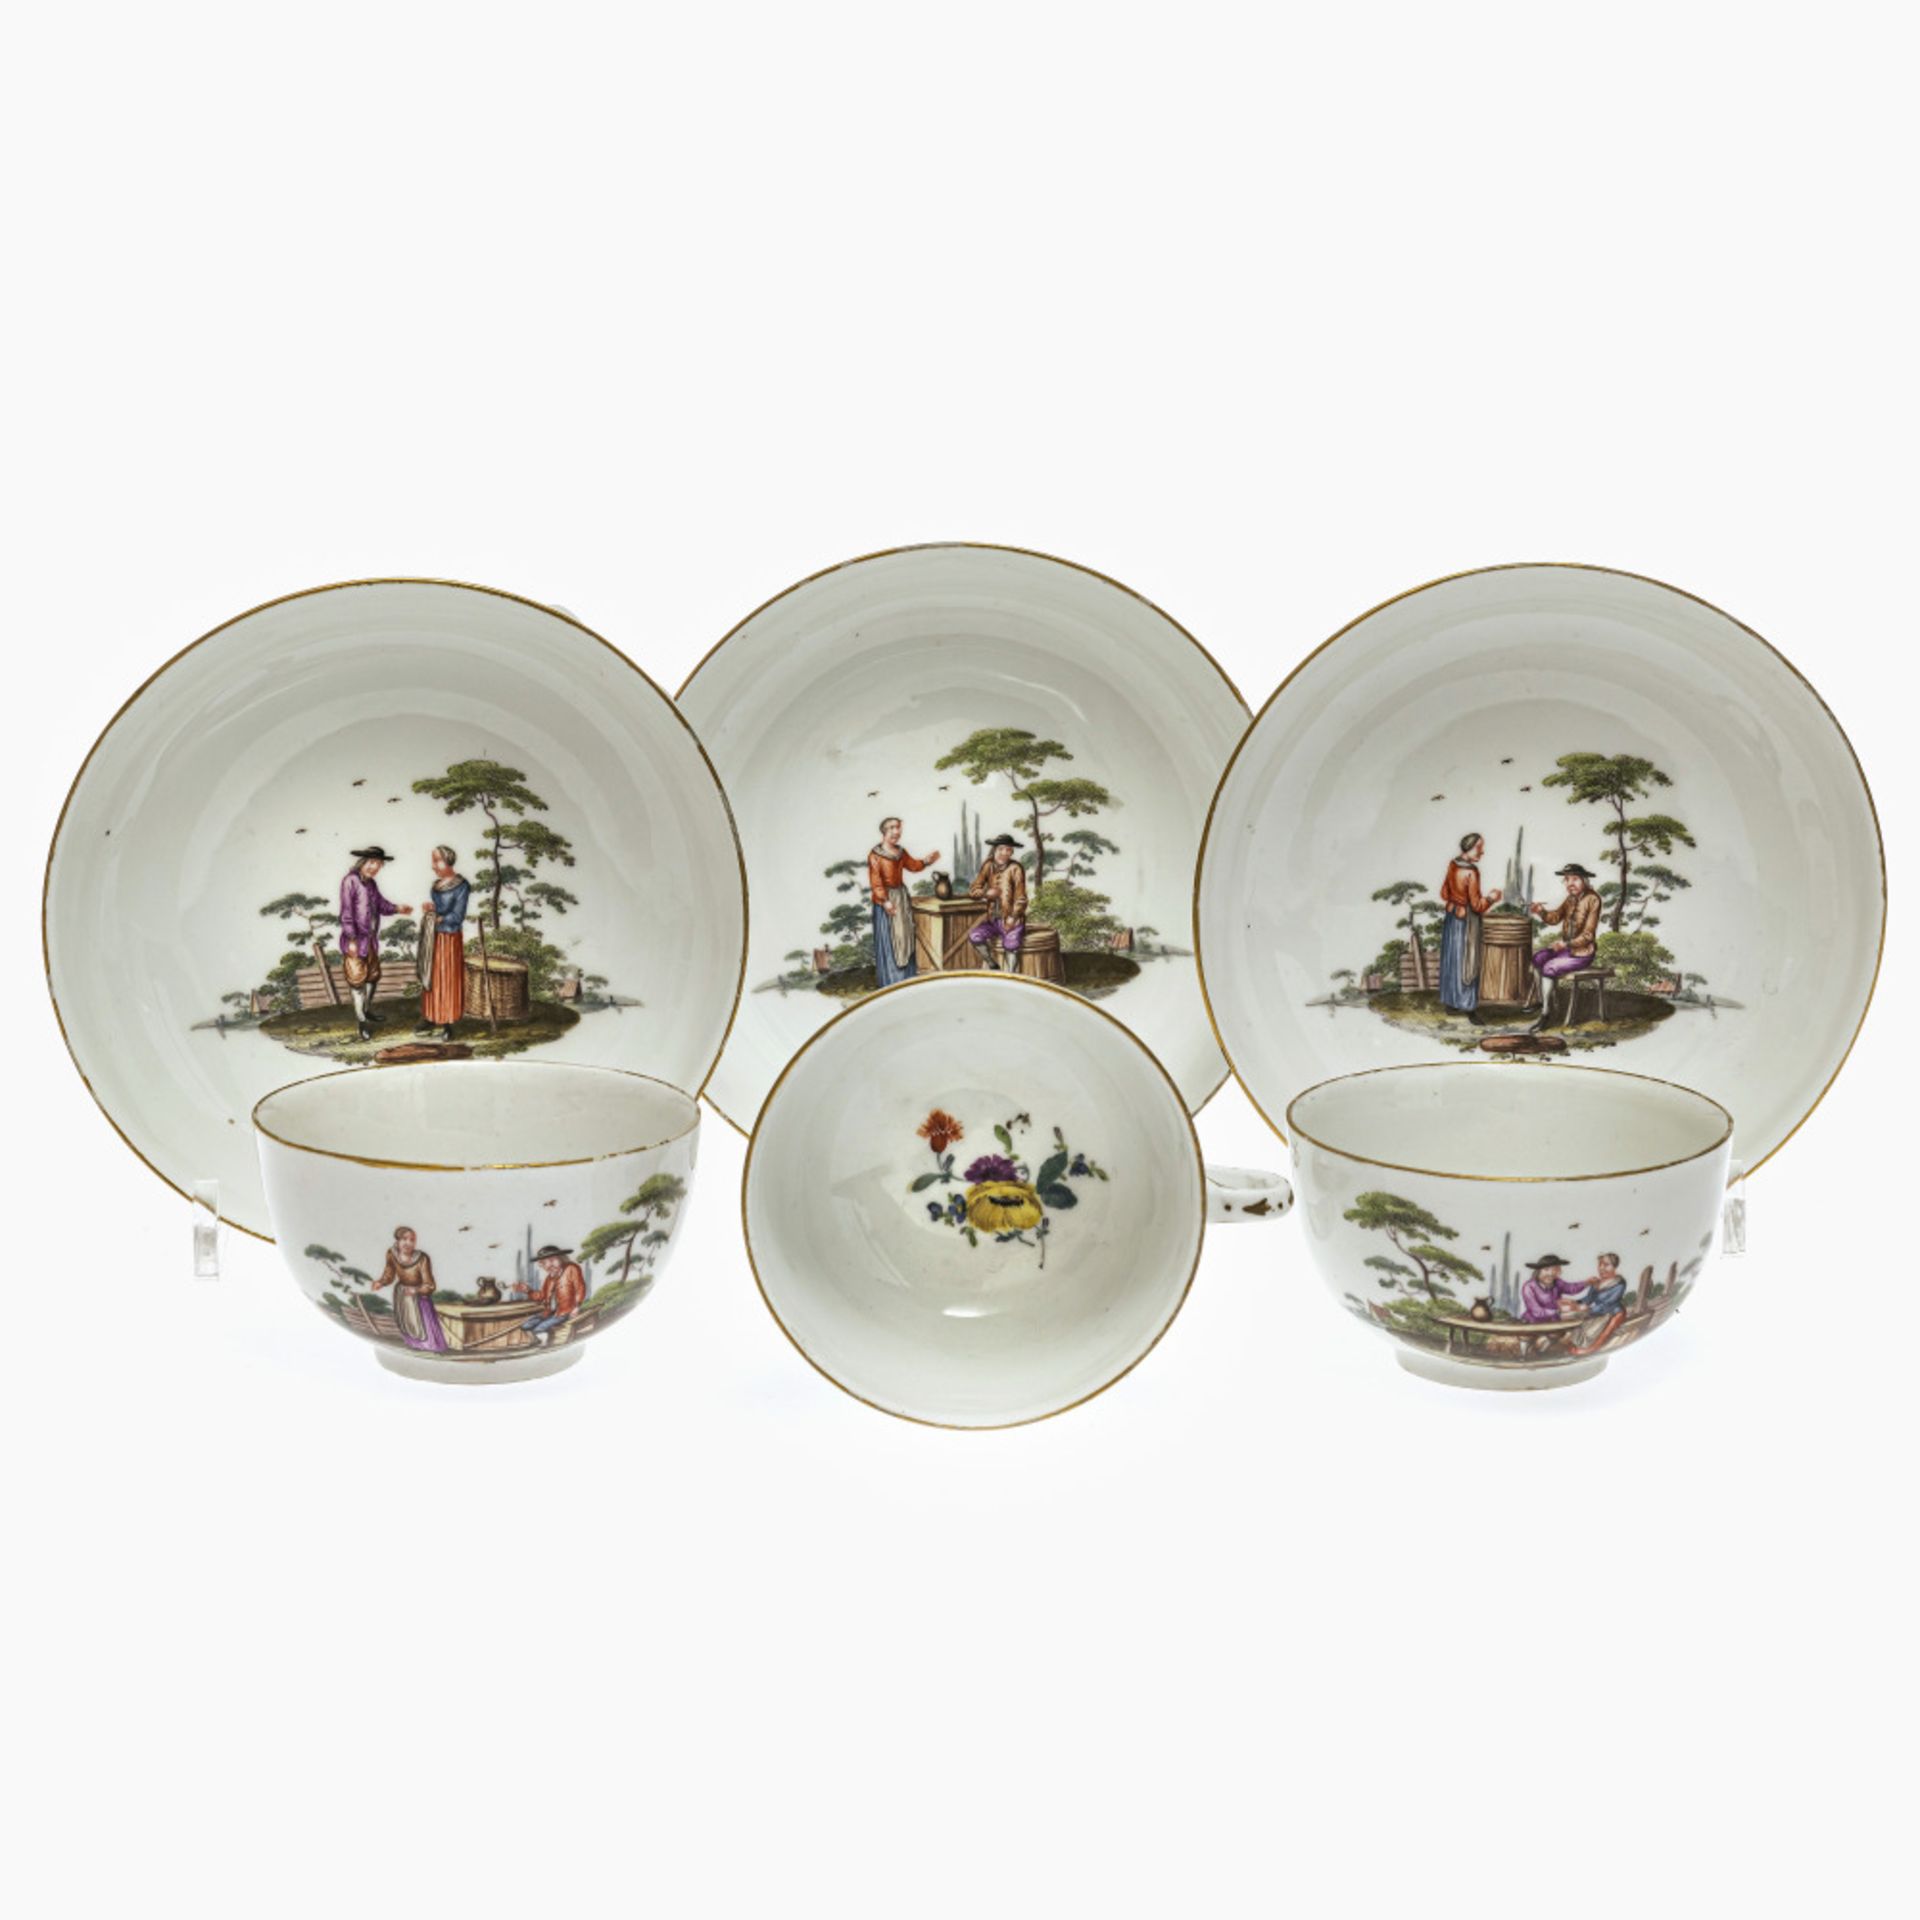 Three cups with saucers - Meissen, 2nd half of the 18th century